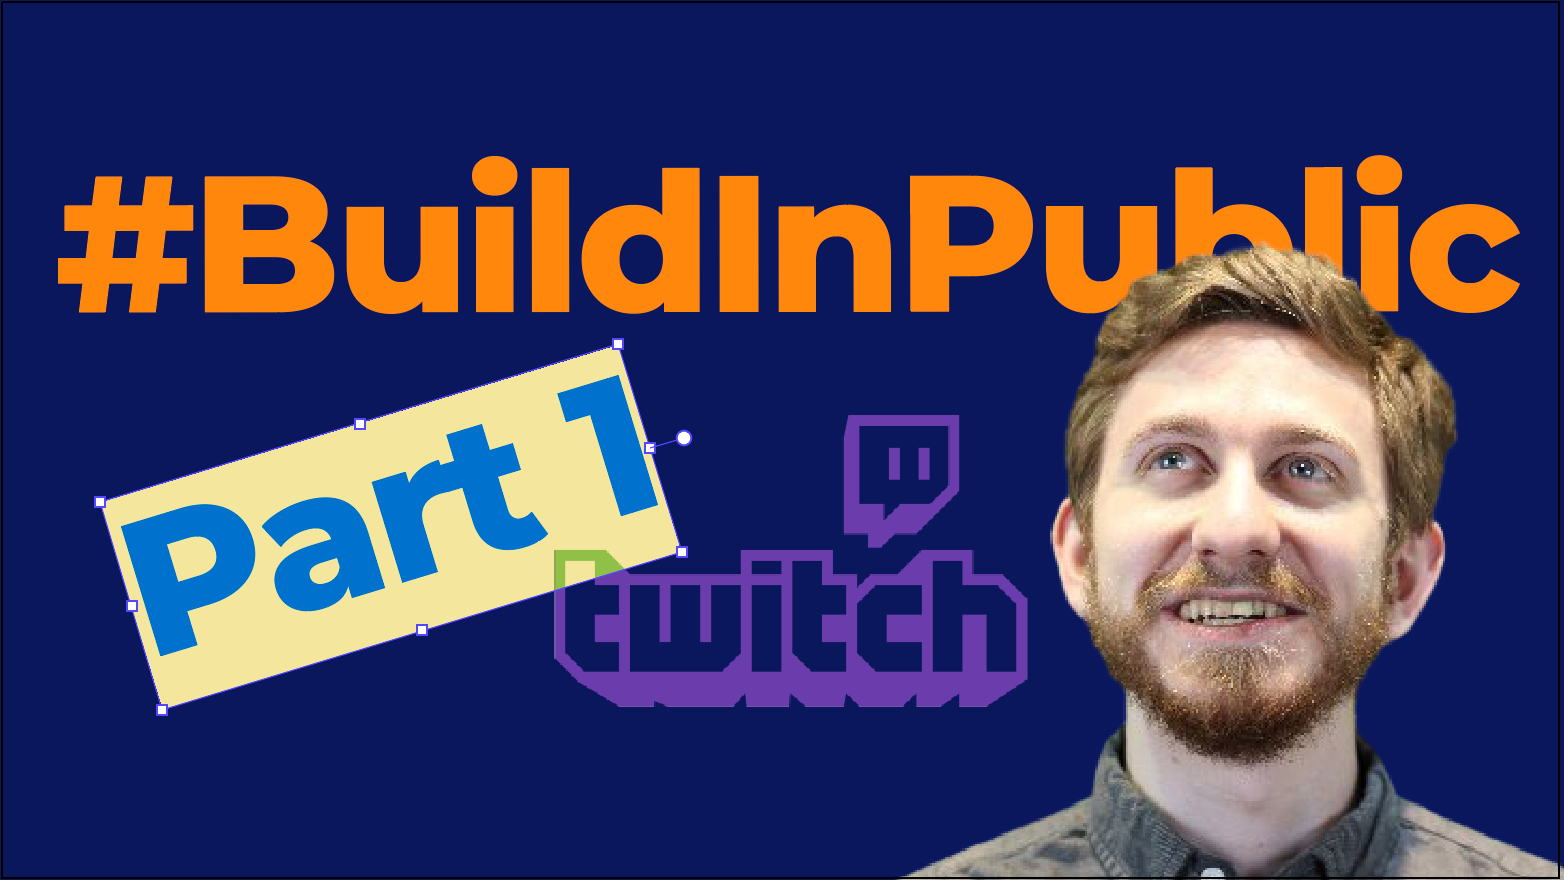 
Building a startup in public on Twitch.tv